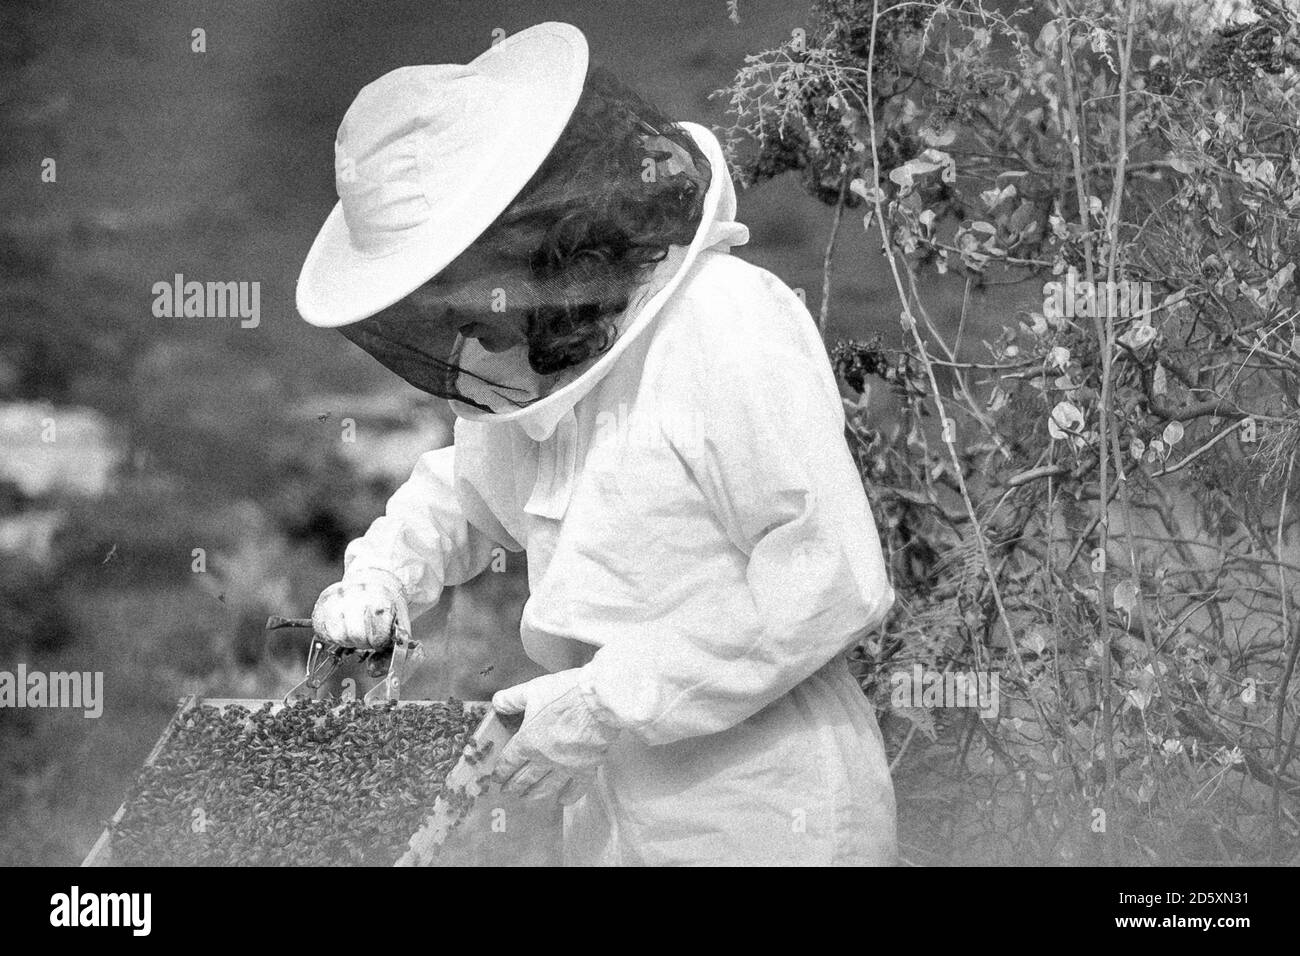 Young woman beekeeper at work in a nature Stock Photo